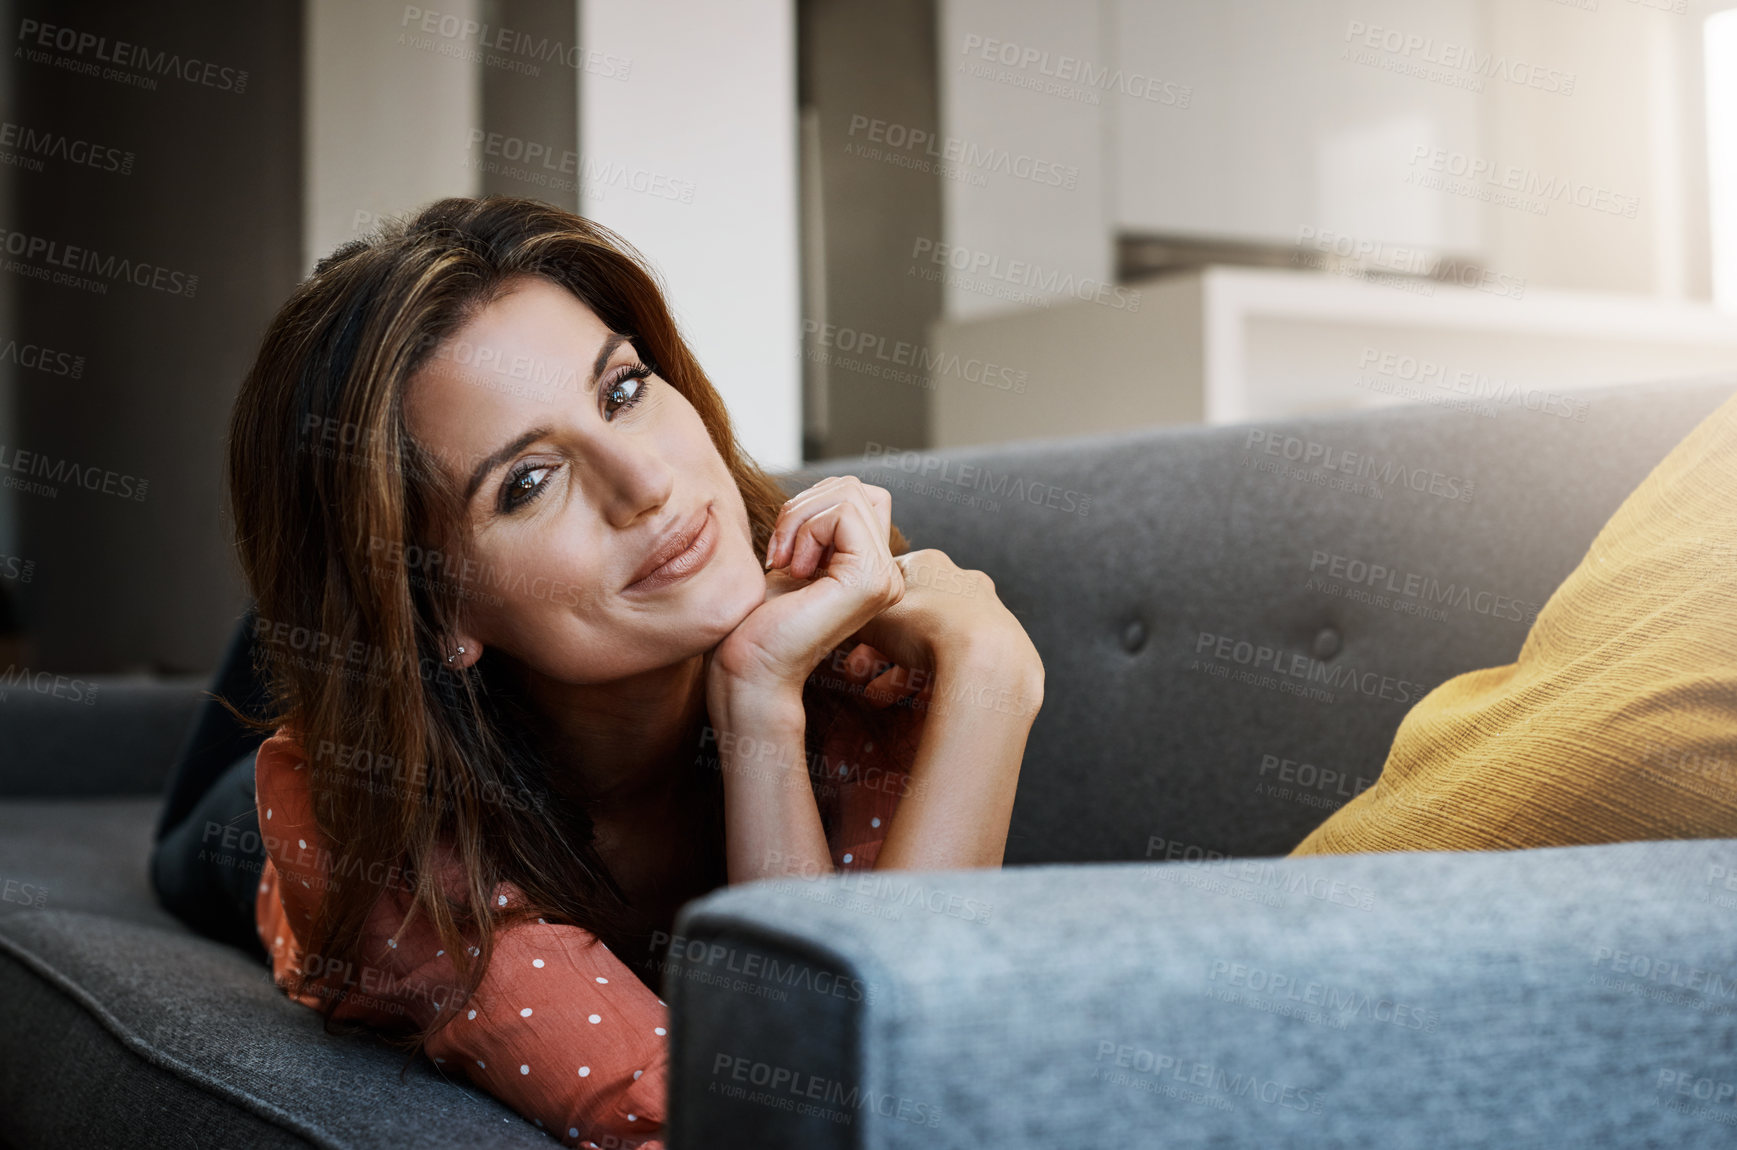 Buy stock photo Portrait of an attractive young woman relaxing on the sofa at home